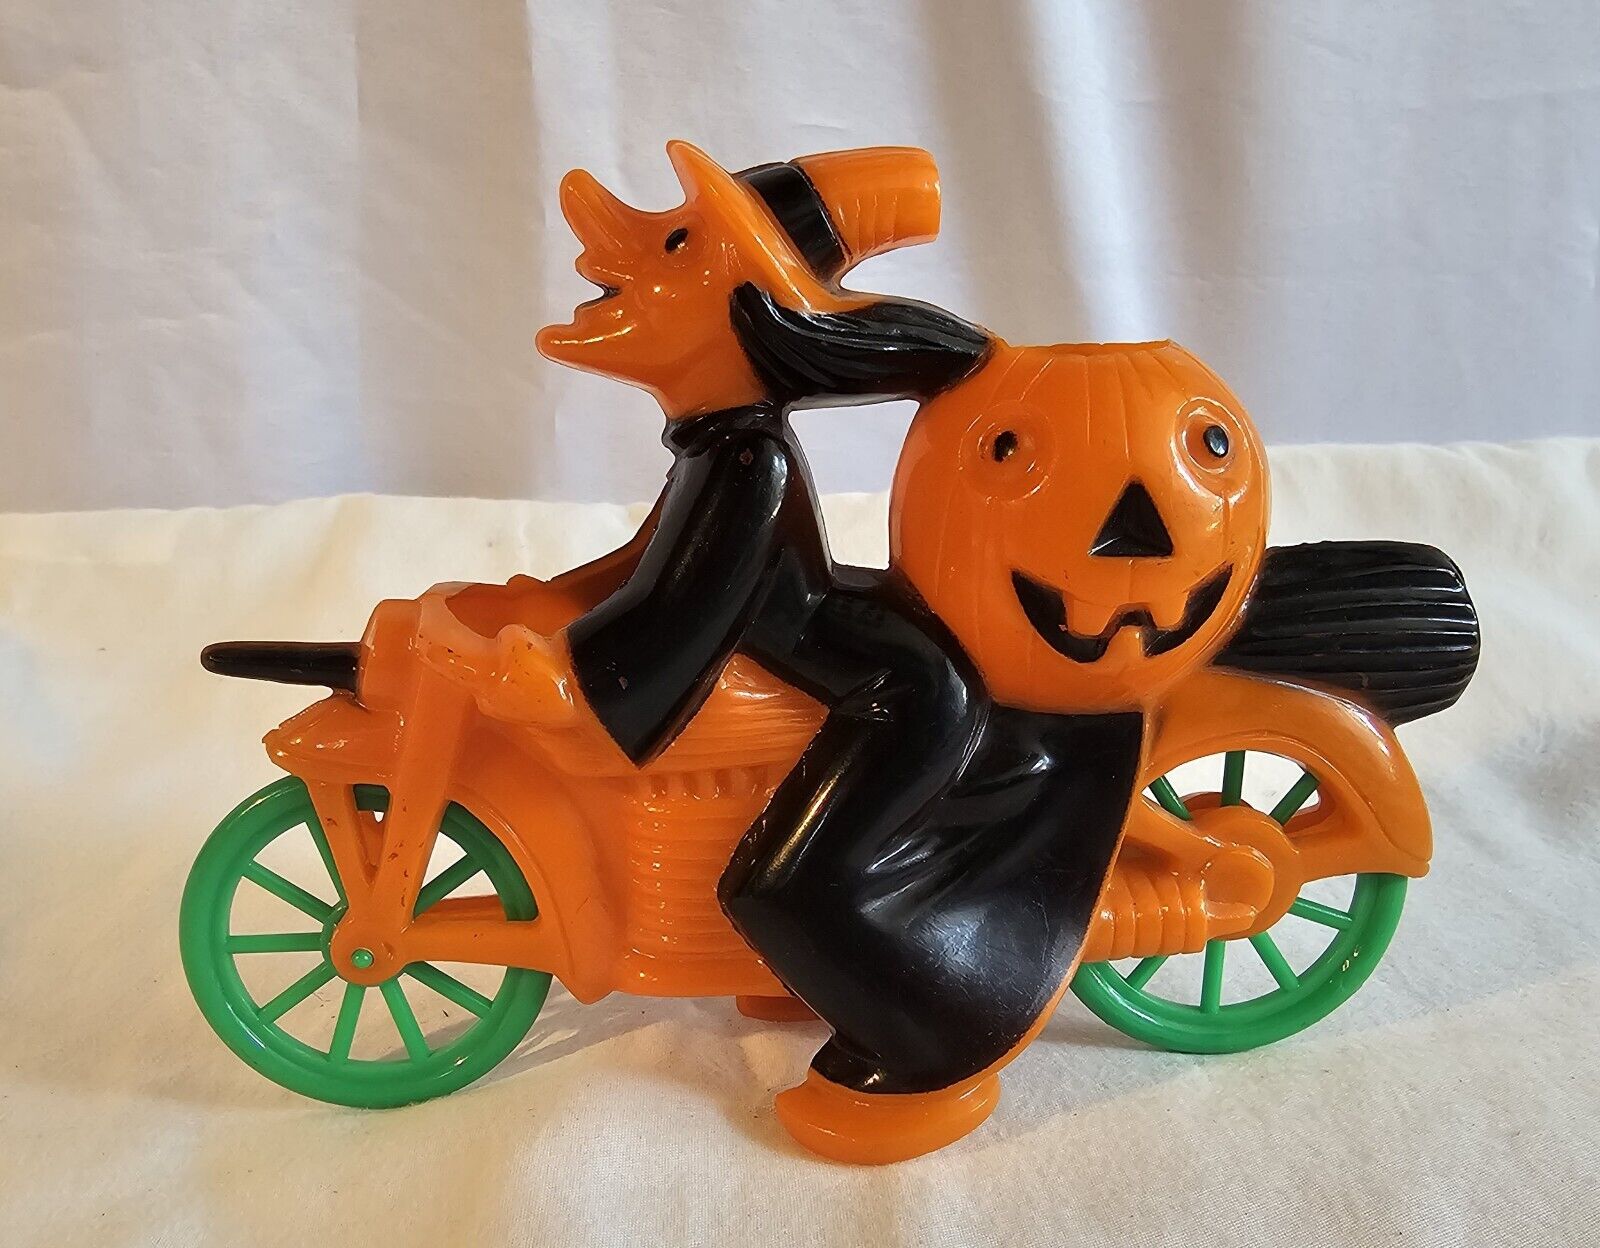 RARE 1950’s Rosbro Halloween Toy/candy WITCH ON A Motorcycle Broom Pumpkin